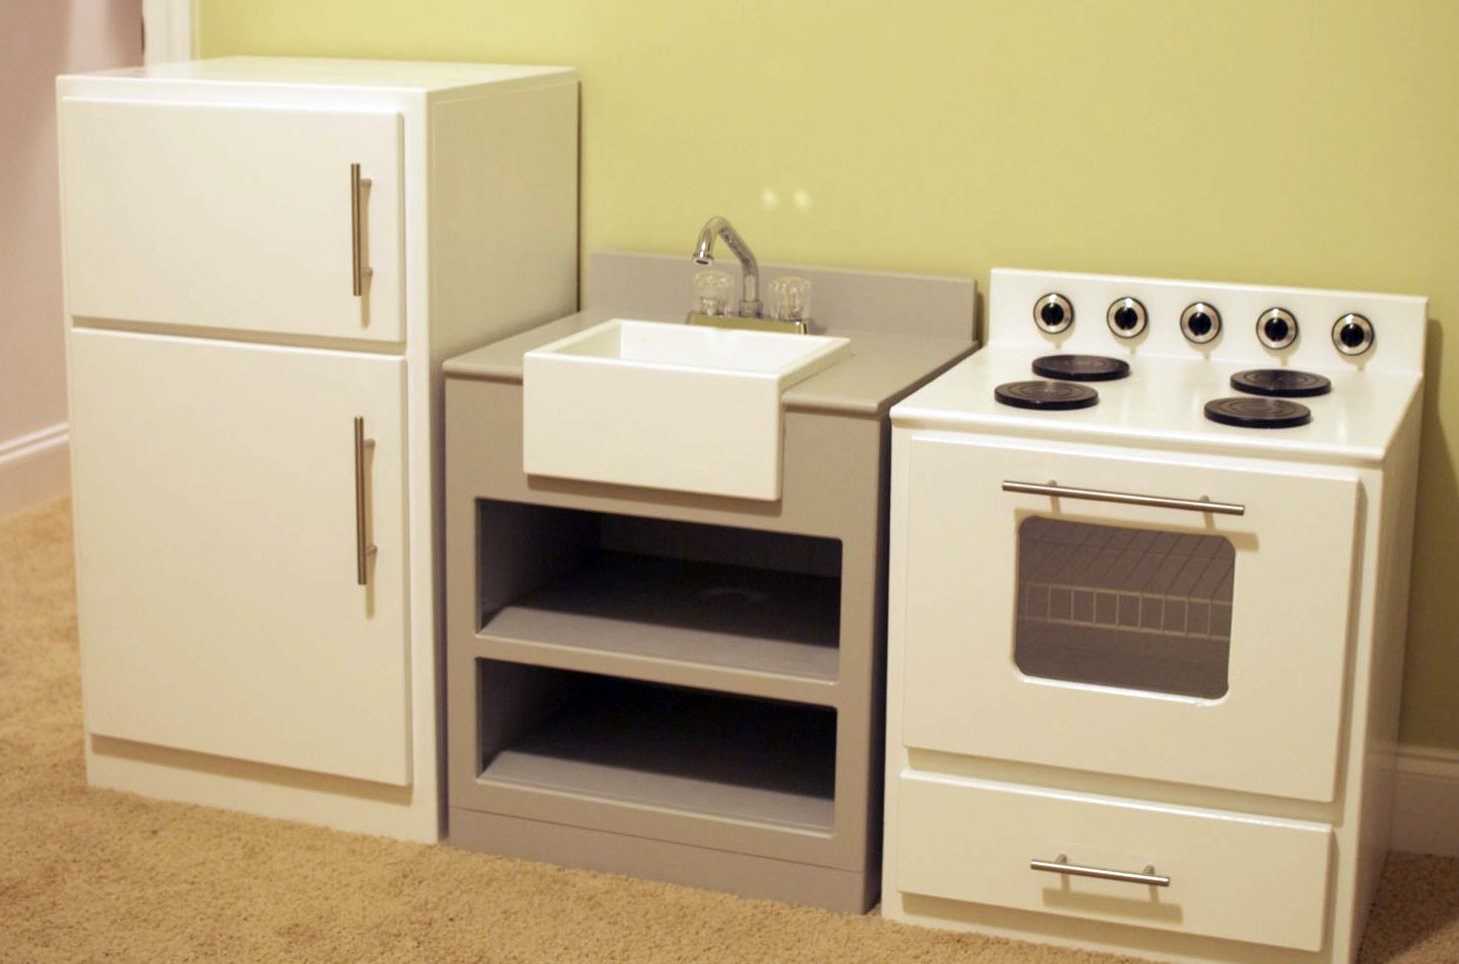 DIY Wood Play Kitchen
 Best Woodworking Plans Free Lowes Play Kitchen Plans